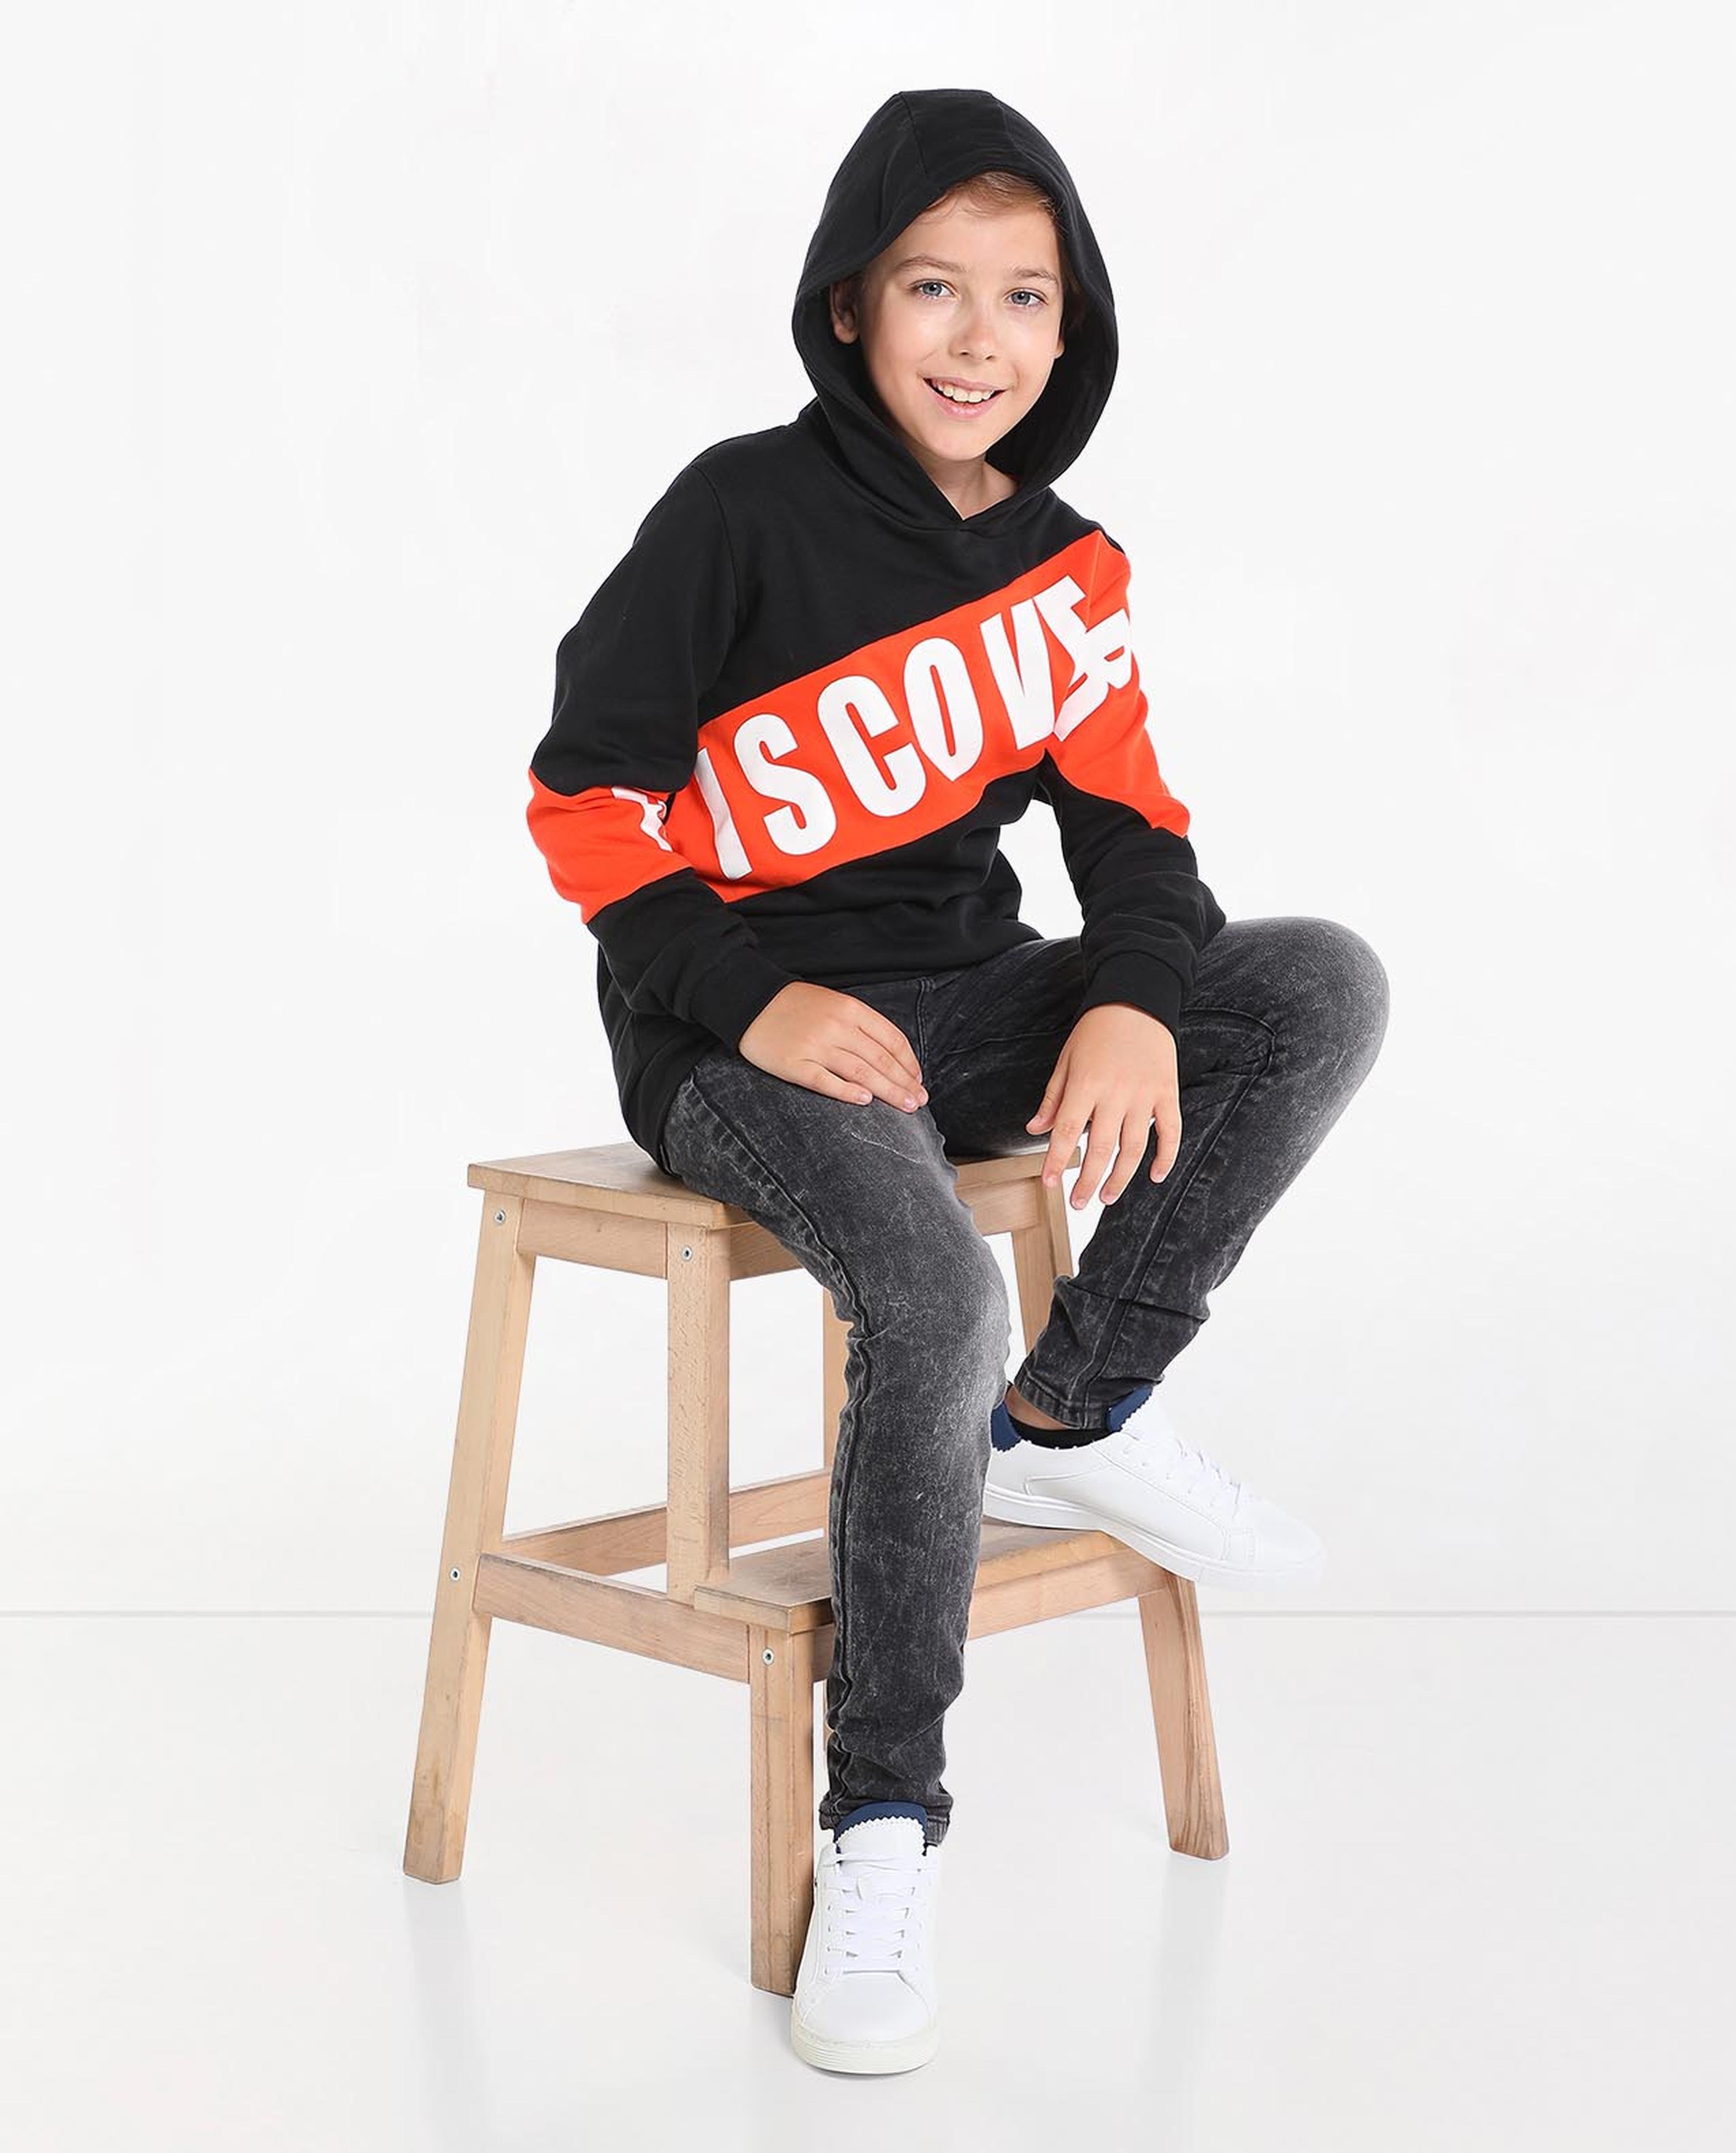 Typography Printed Sweatshirt with Hooded Neck and Long Sleeves